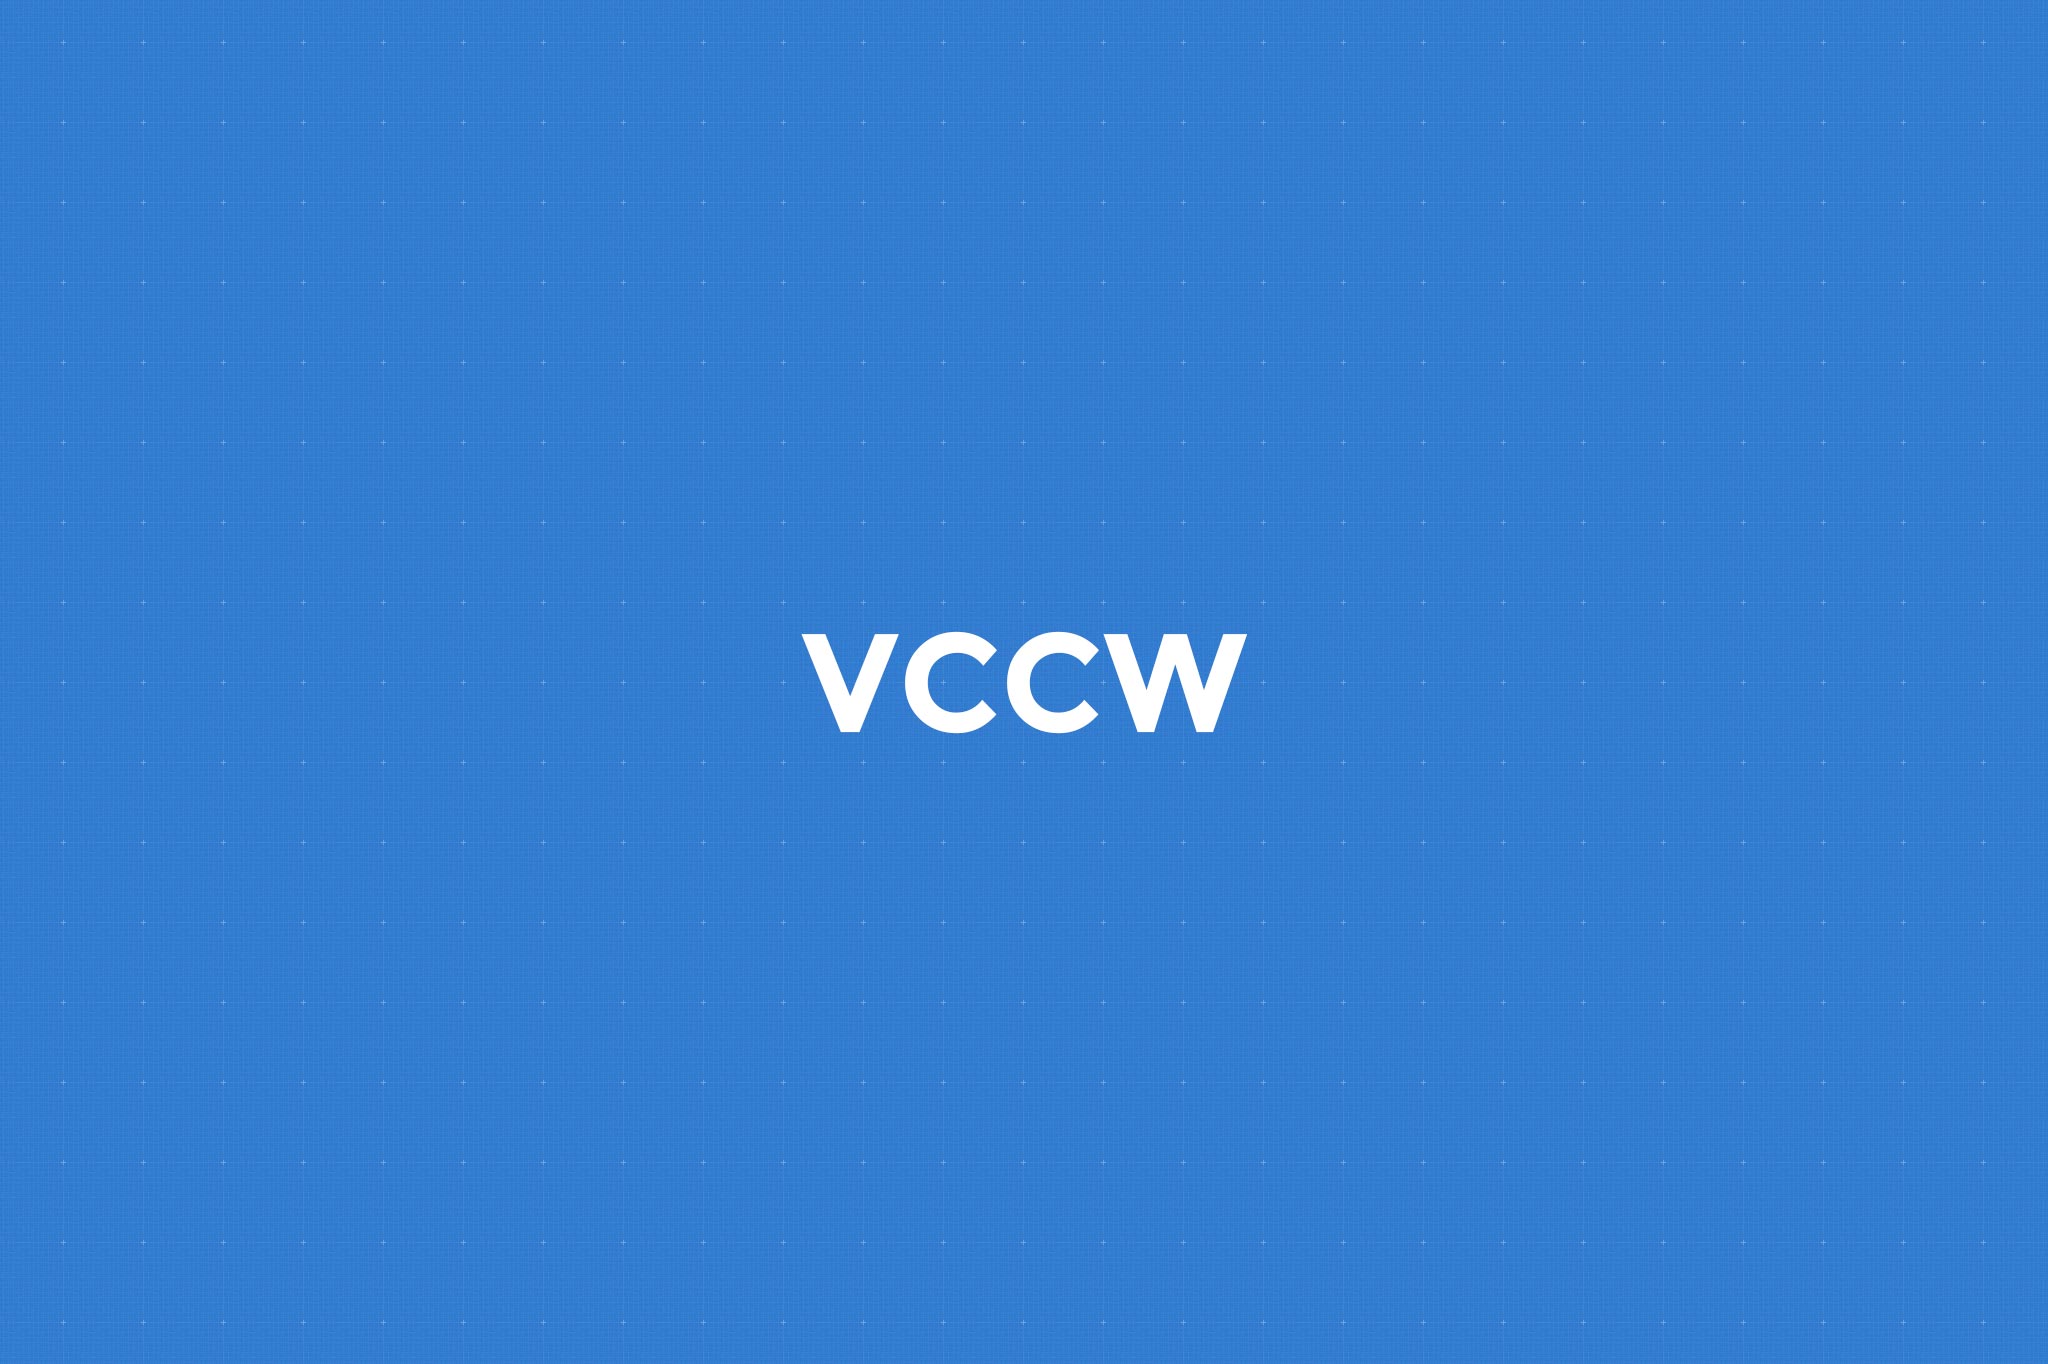 catch-vccw3-local-wordmove-deploy